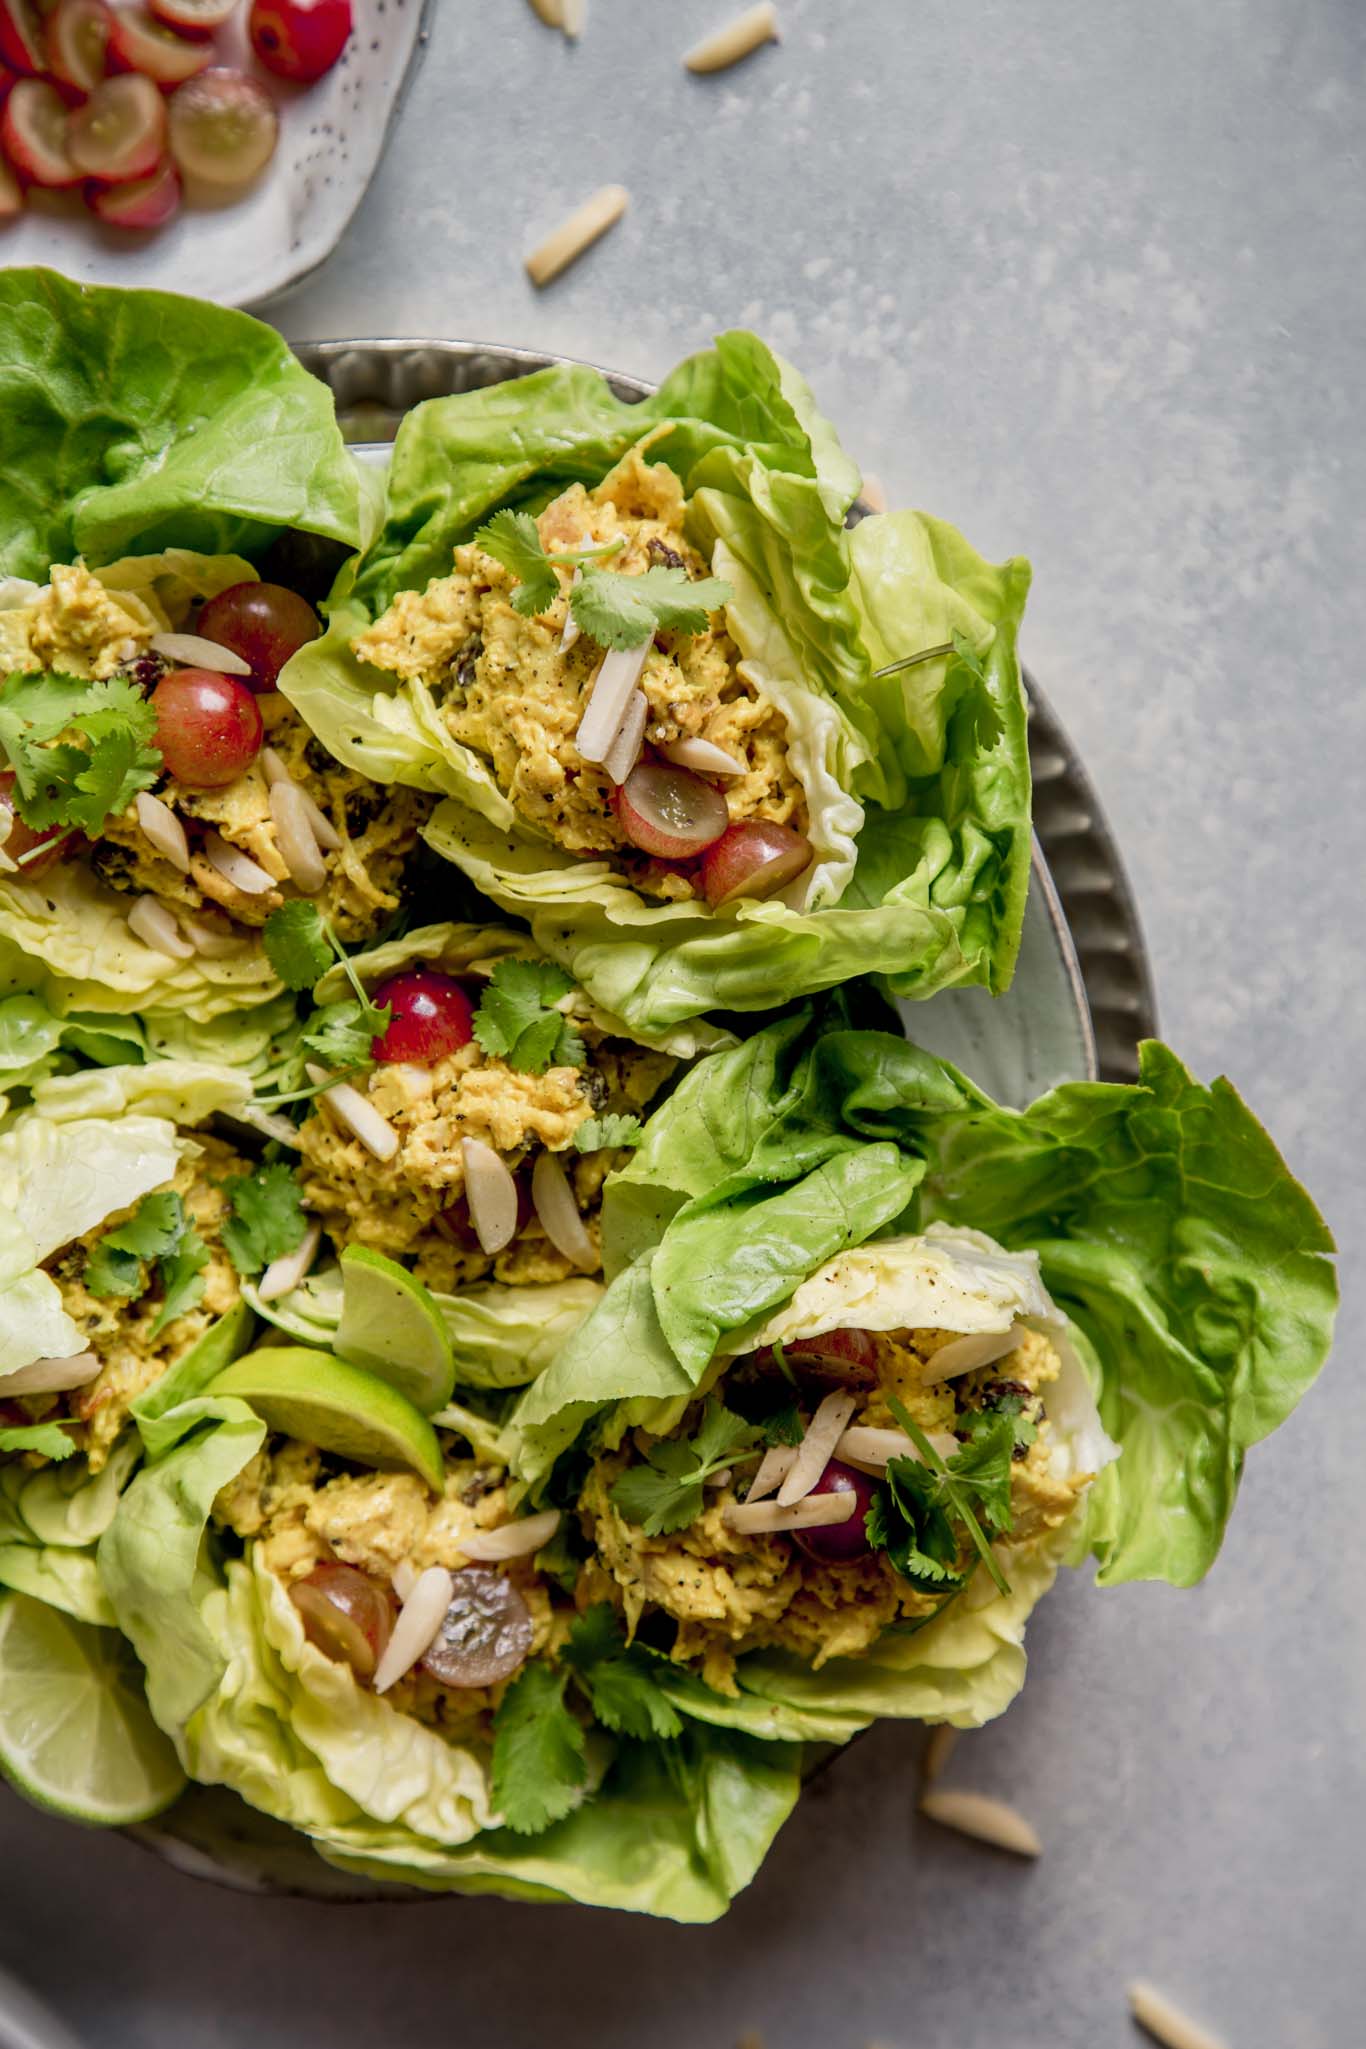 Platter of chicken curry salad lettuce wraps.